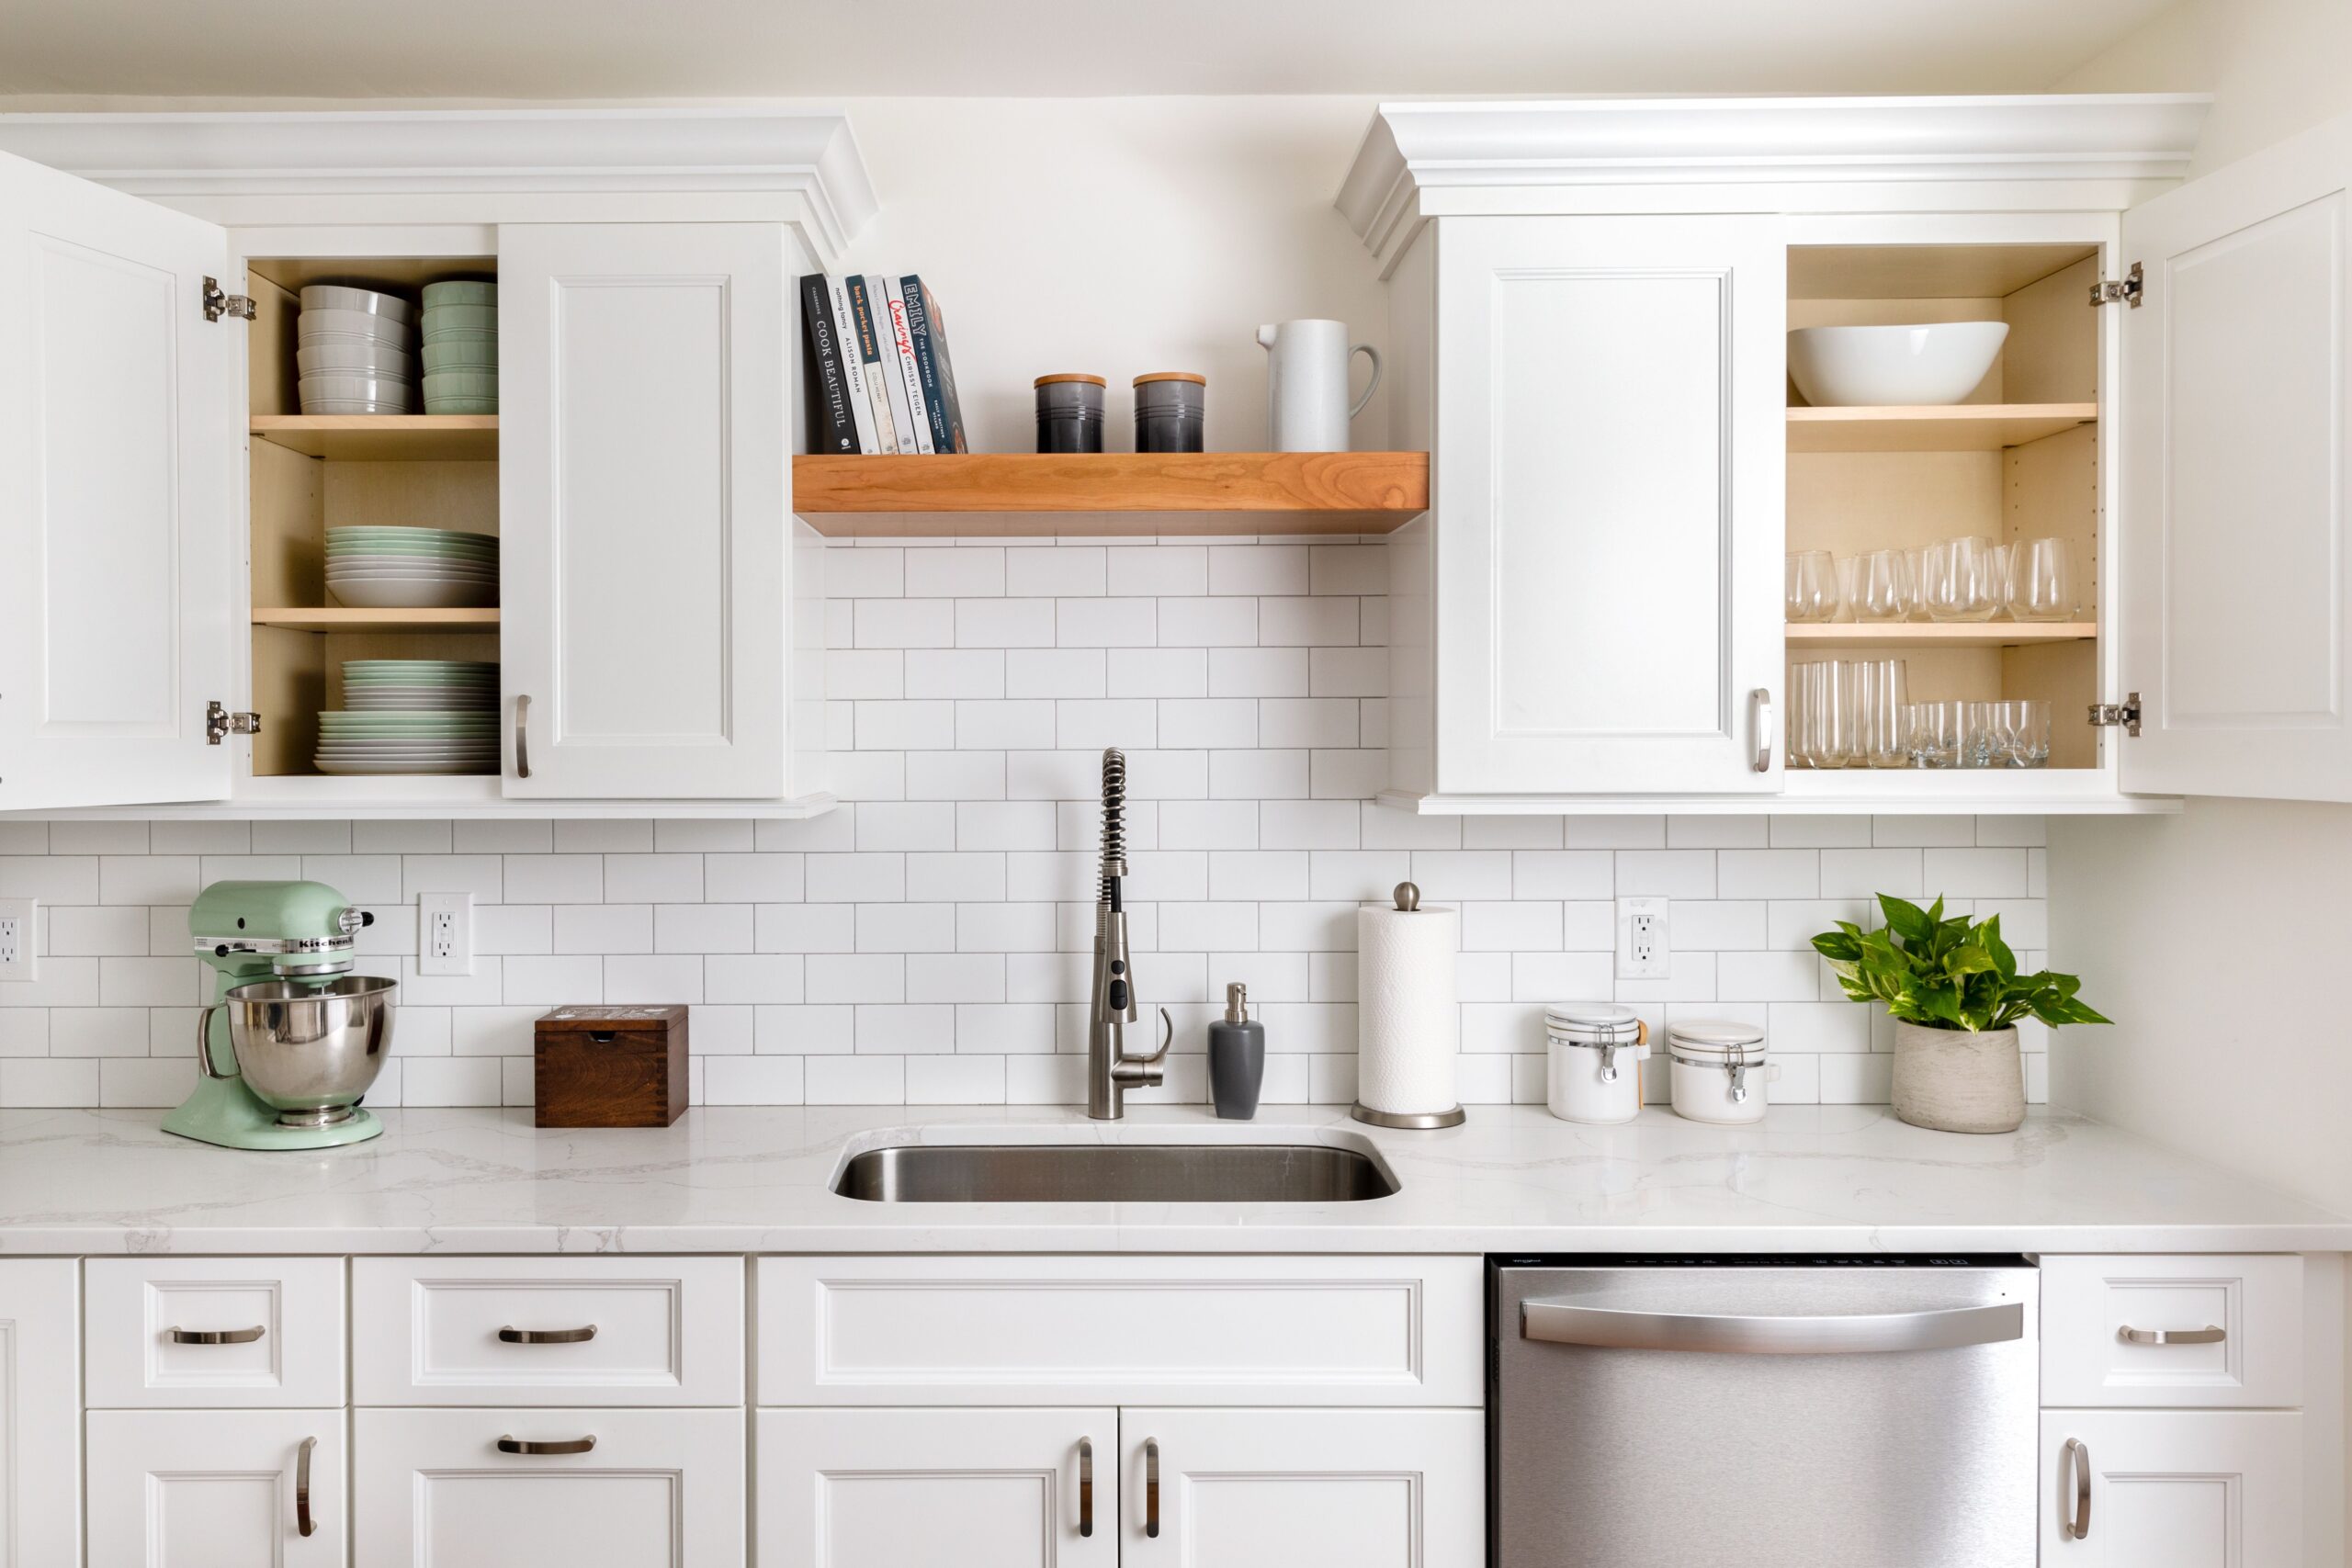 The Ultimate Guide to Organizing Your Home Kitchen